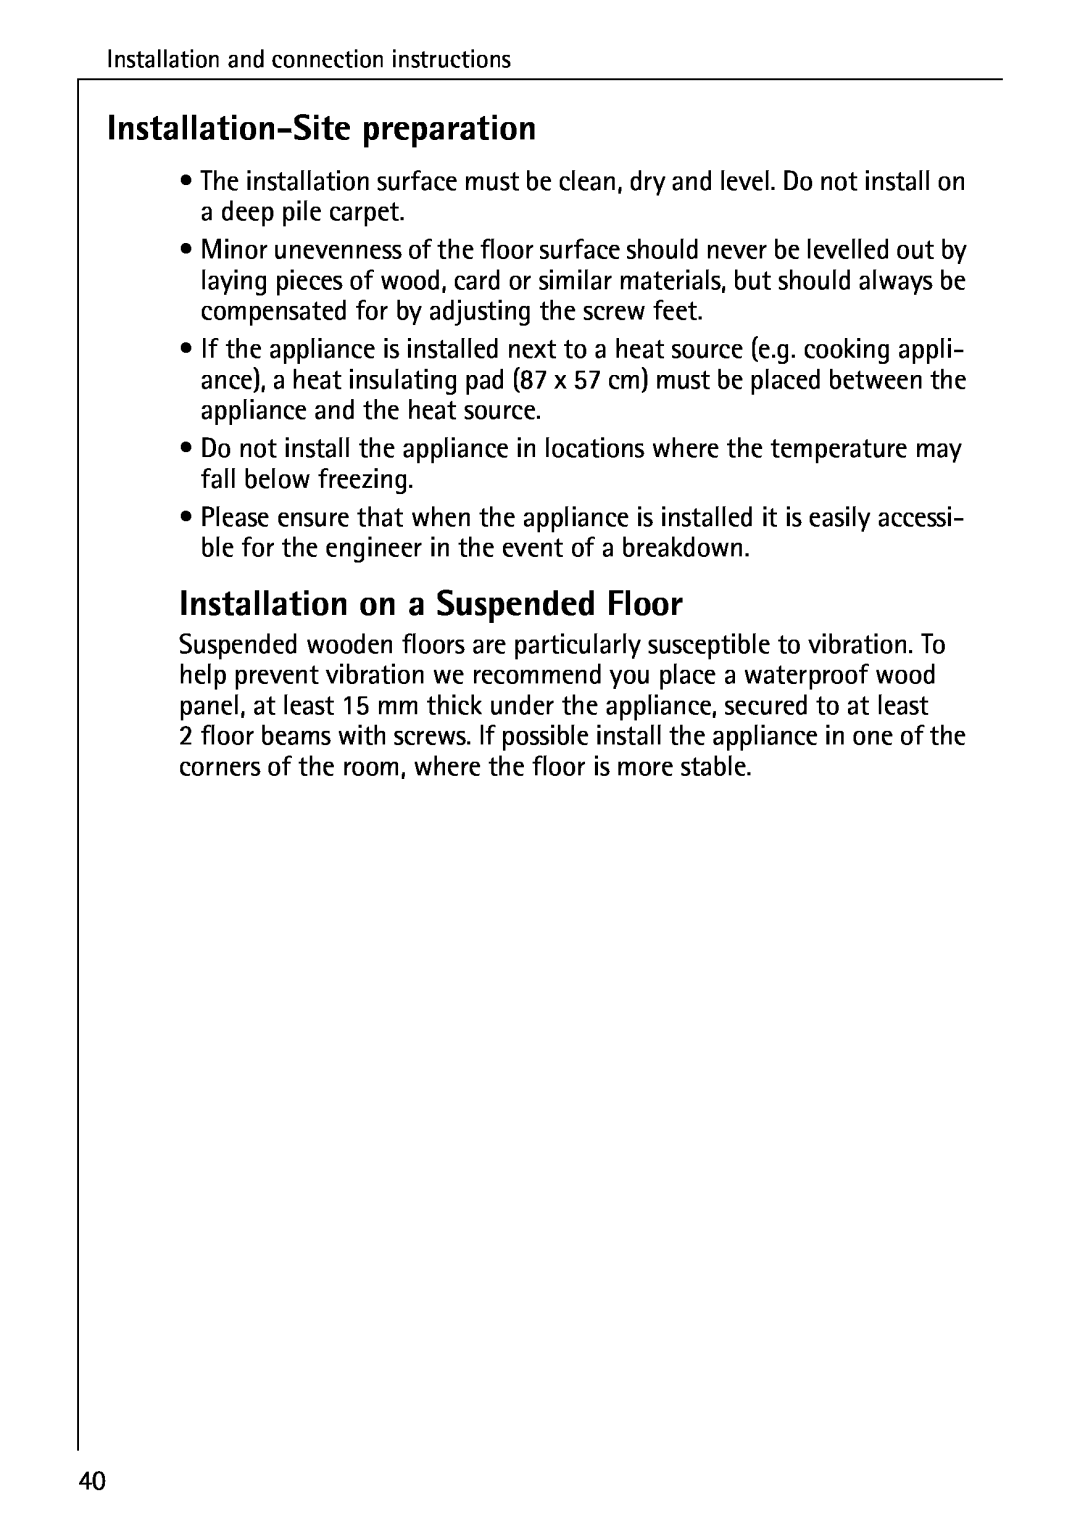 Electrolux 76639 manual Installation-Site preparation, Installation on a Suspended Floor 